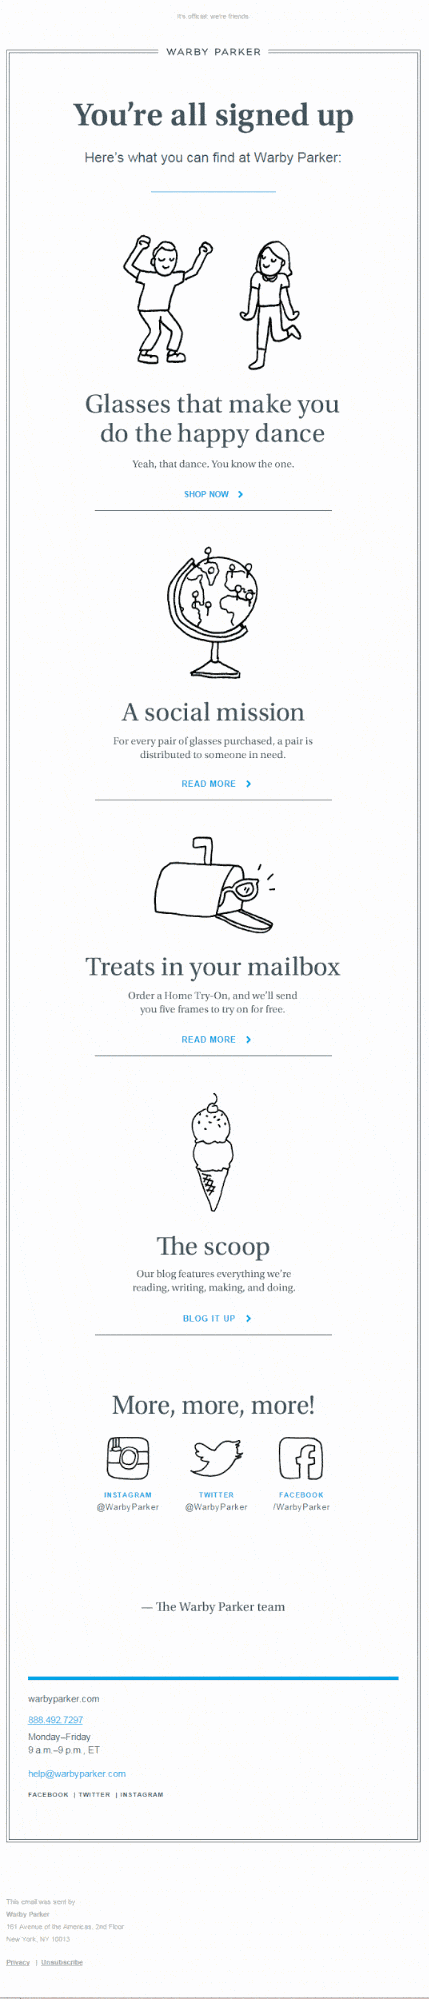 Warby Parker Welcome email